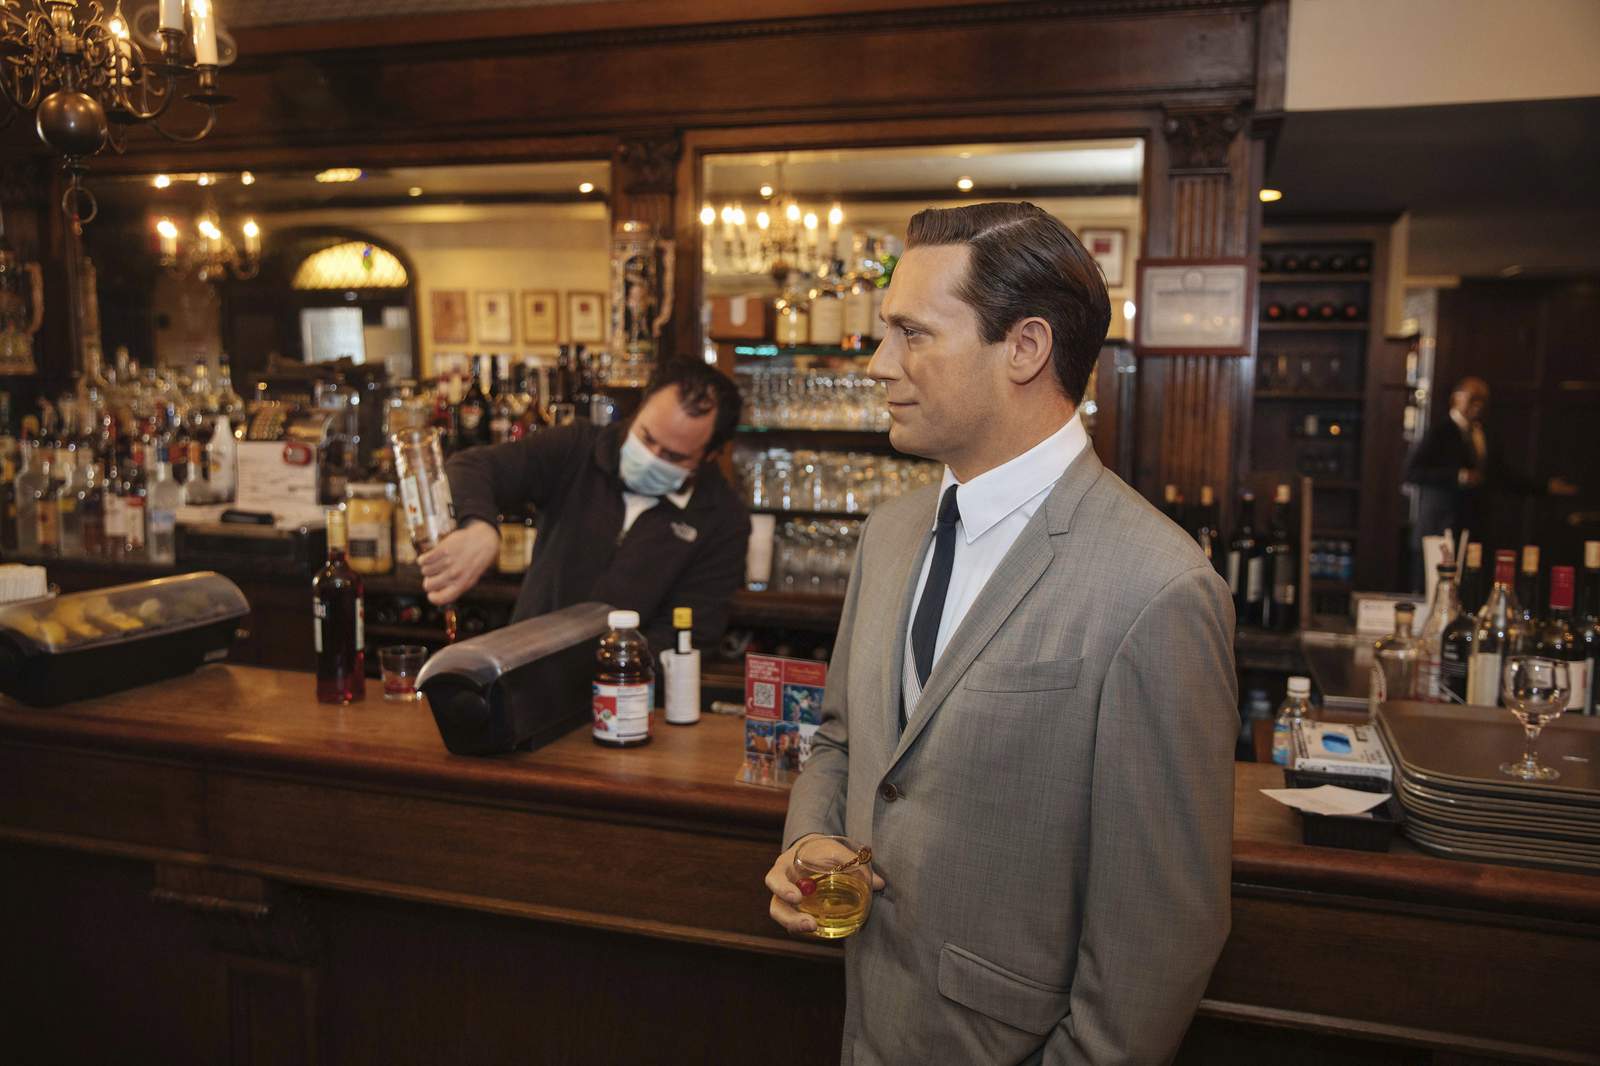 NYC steakhouse stunt: A wax Don Draper hanging at the bar